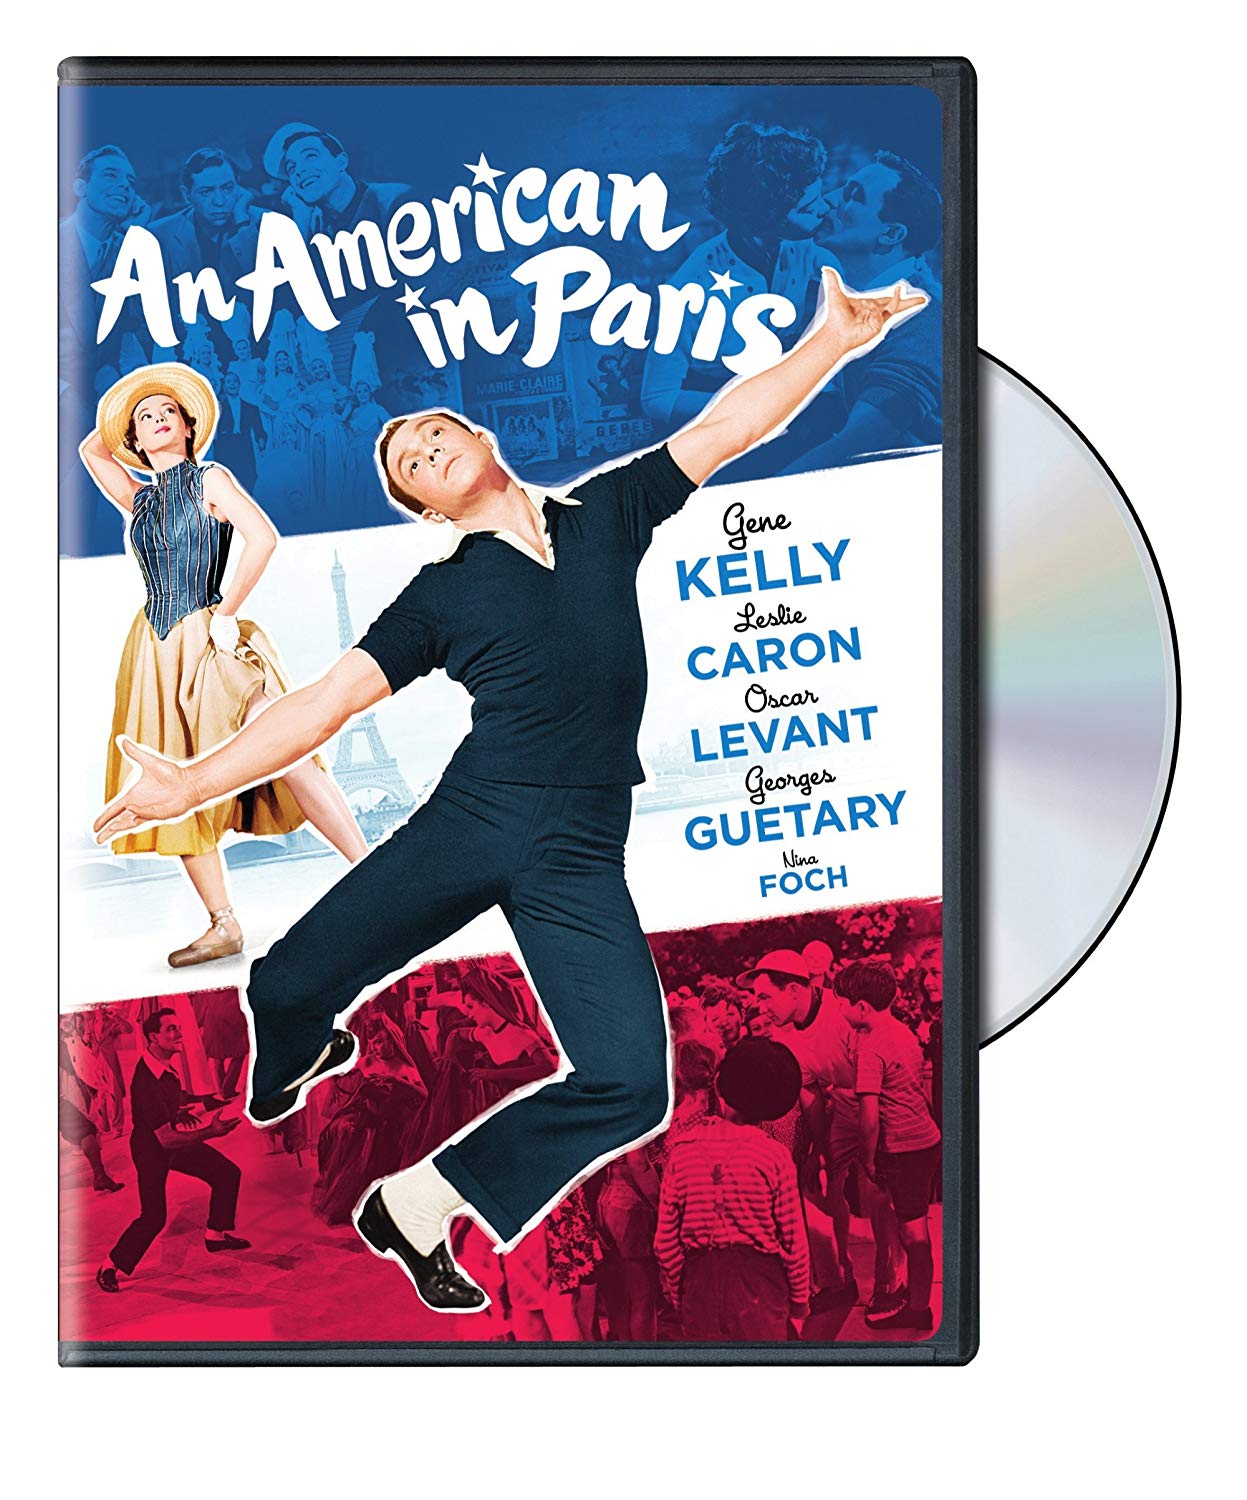 An American in Paris (1951), starring Gene Kelly, Leslie Caron, Oscar Levant, directed by Vincente Minelli